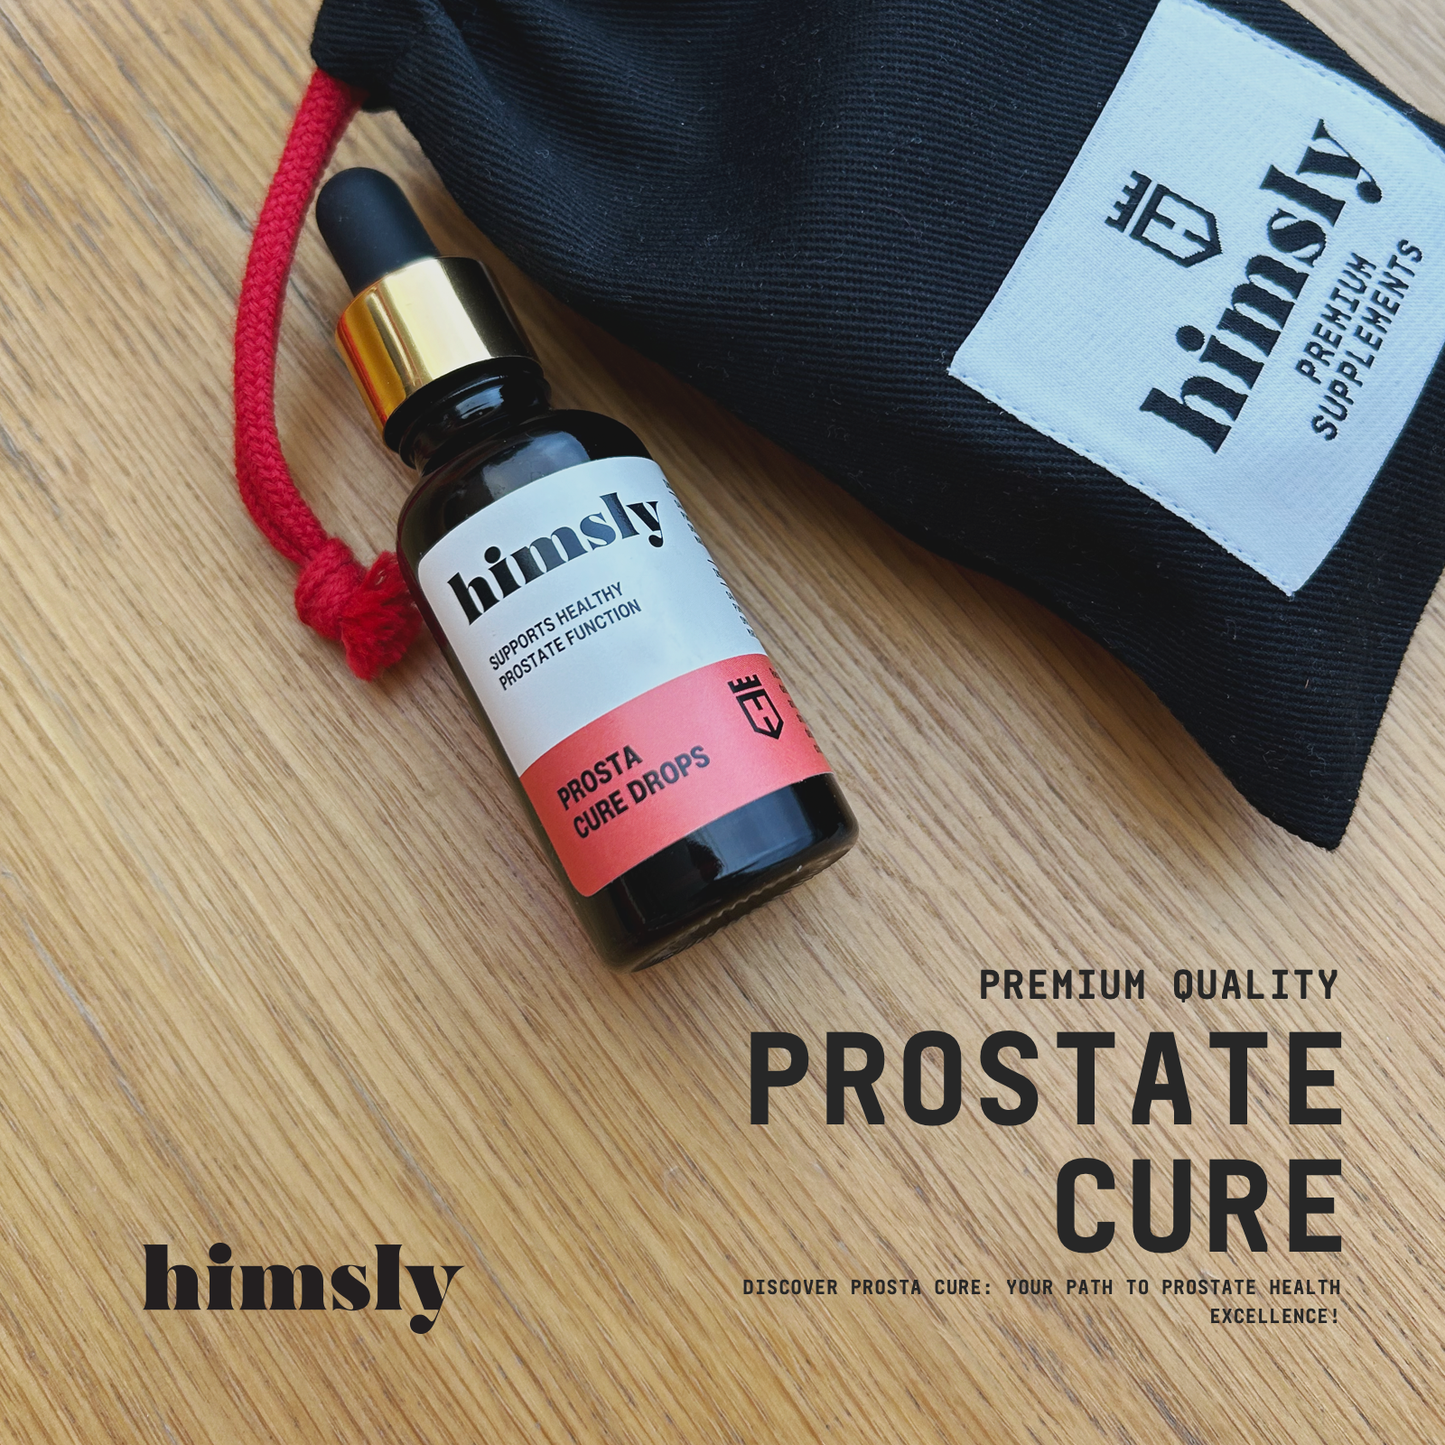 Discover Prosta Cure: Your Path to Prostate Health Excellence!